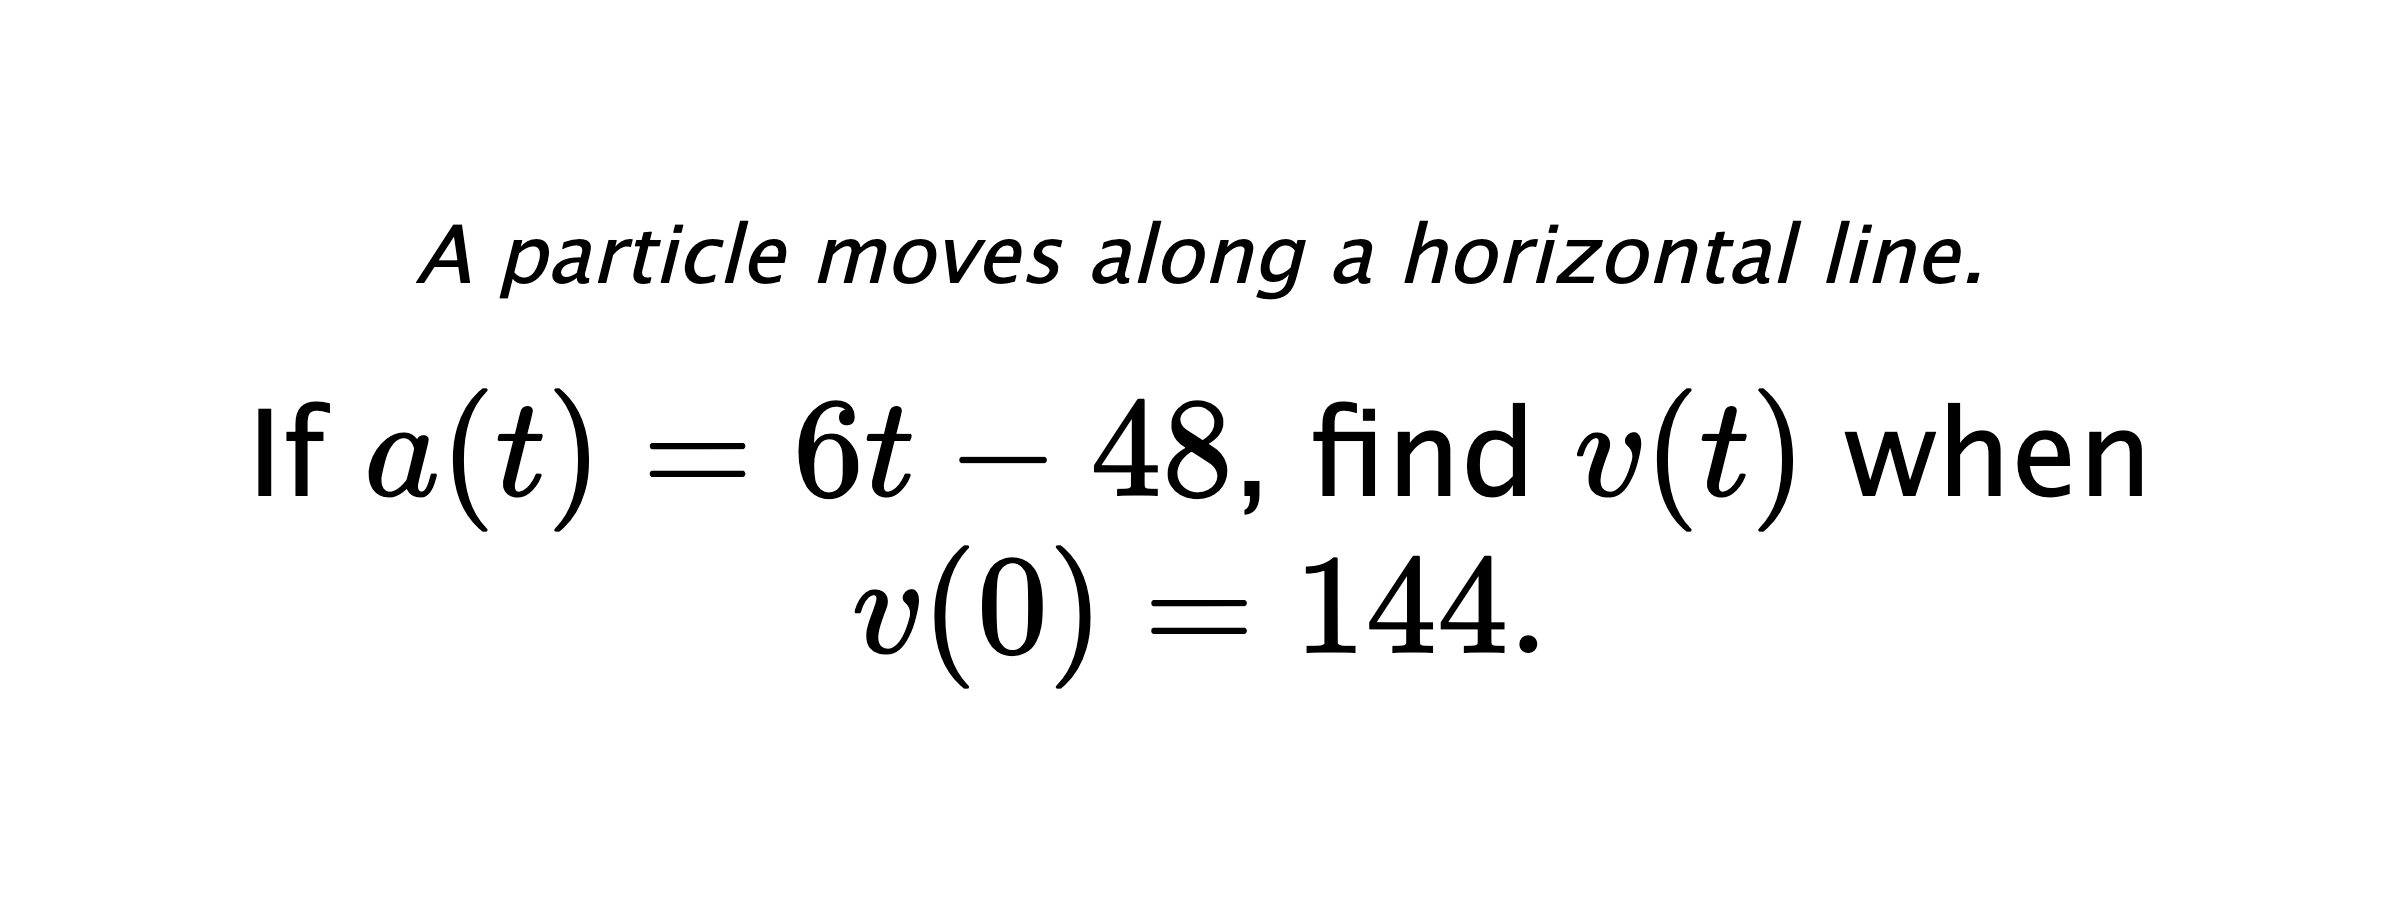 A particle moves along a horizontal line. If $ a(t)=6t-48 $, find $ v(t) $ when $ v(0)=144 .$